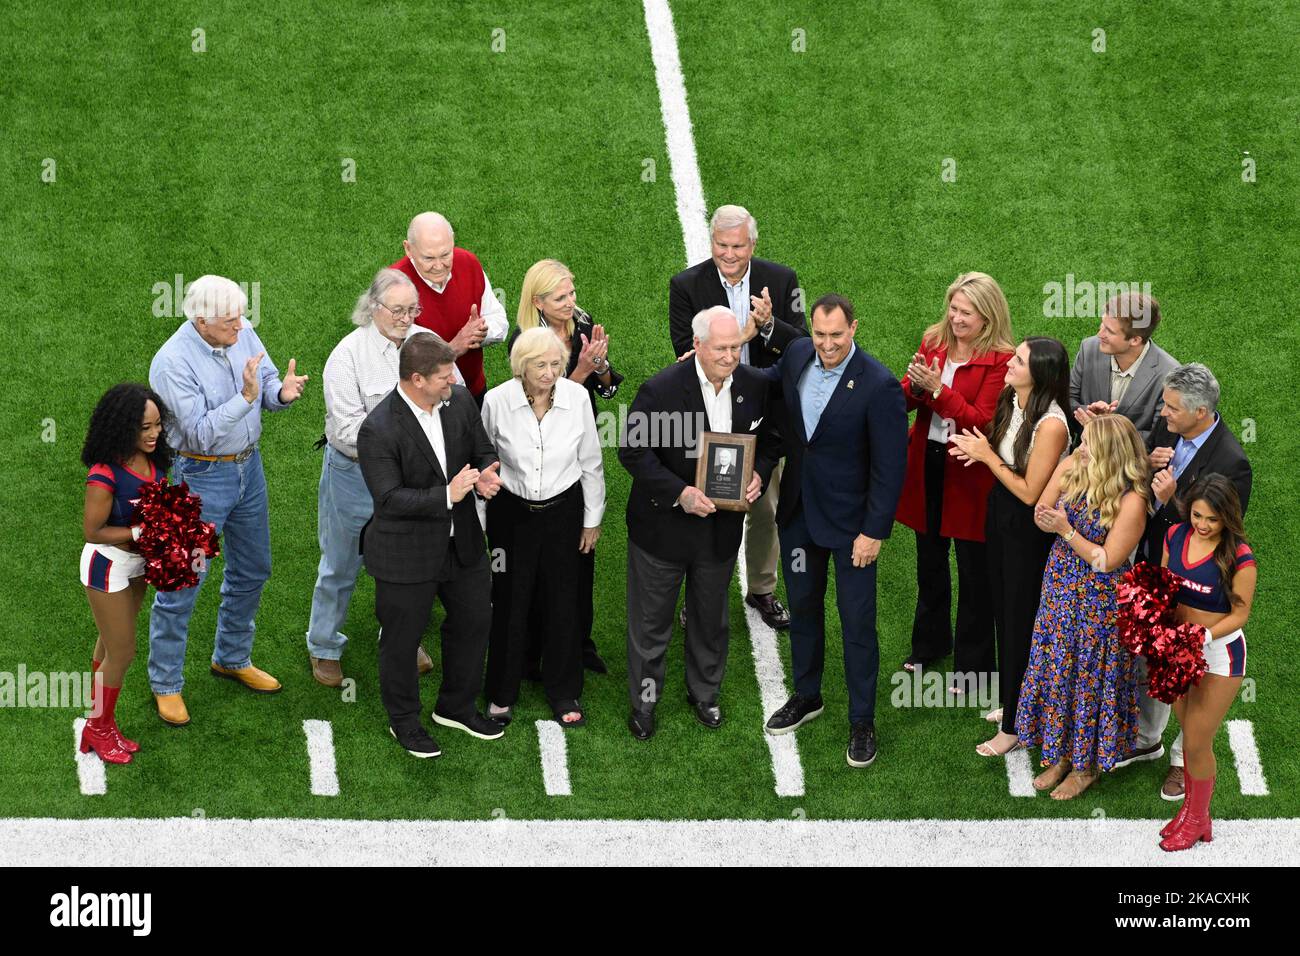 Larry Catuzzi is inducted into the Bowl Season Leadership Hall of Fame at half time of the NFL Football Game between the Tennessee Titans and the Hous Stock Photo